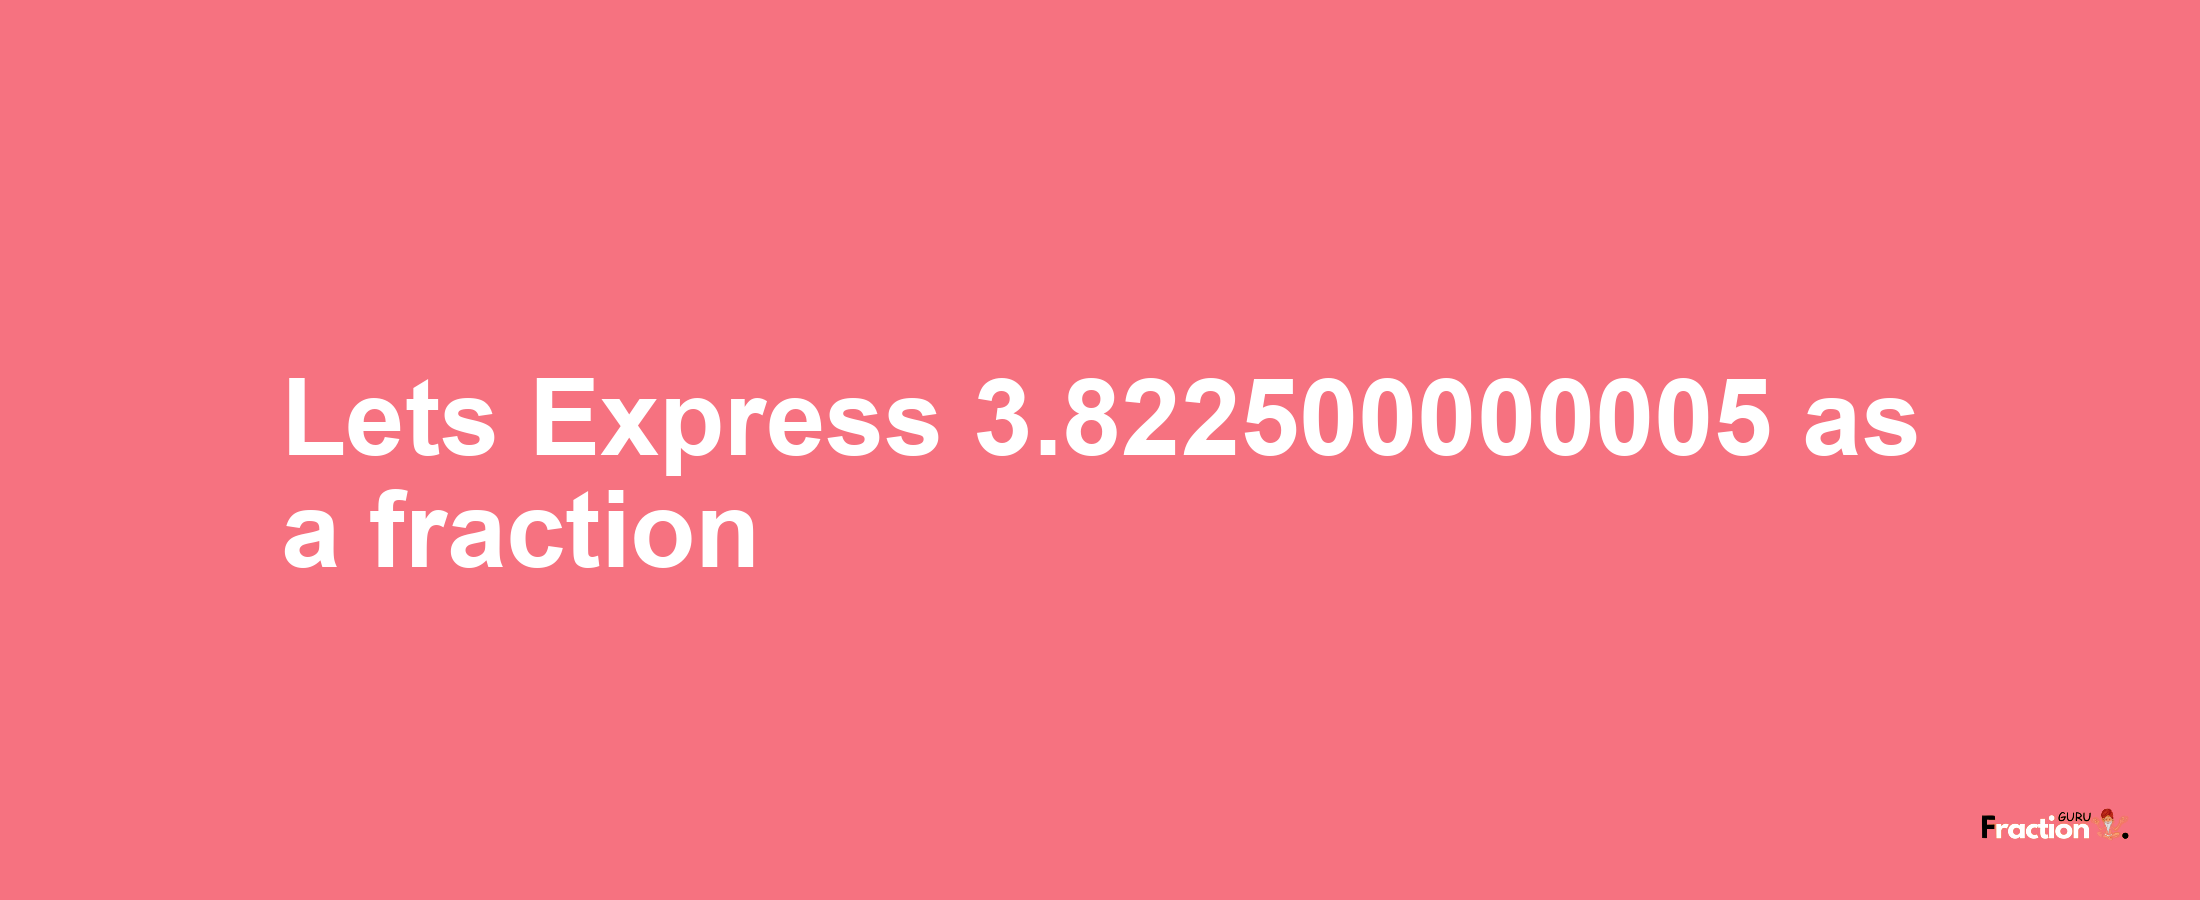 Lets Express 3.822500000005 as afraction